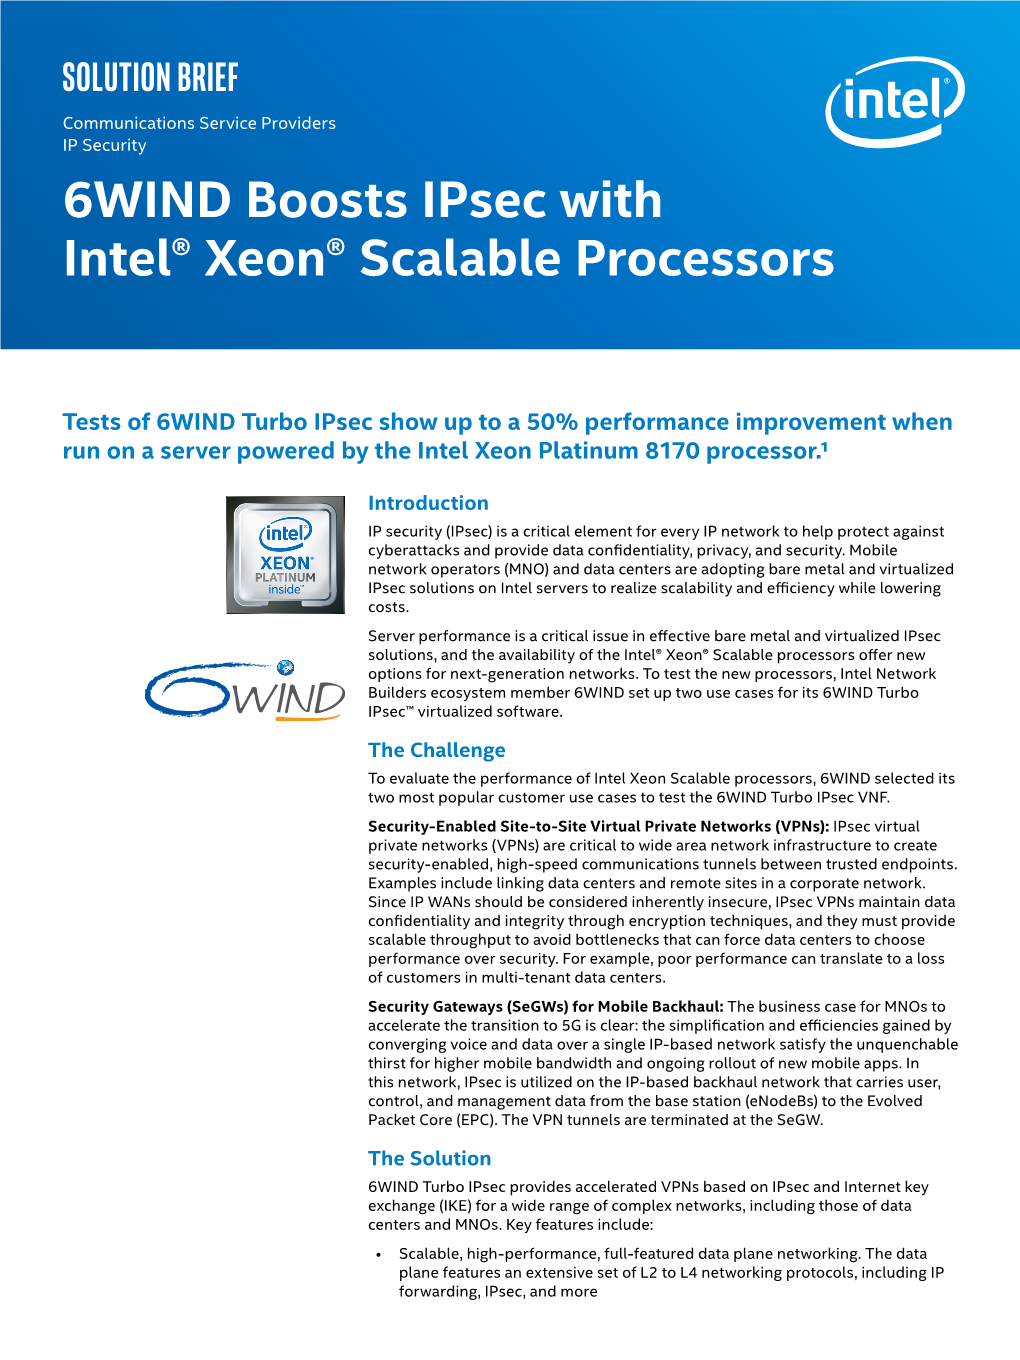 6WIND Boosts Ipsec with Intel® Xeon® Scalable Processors